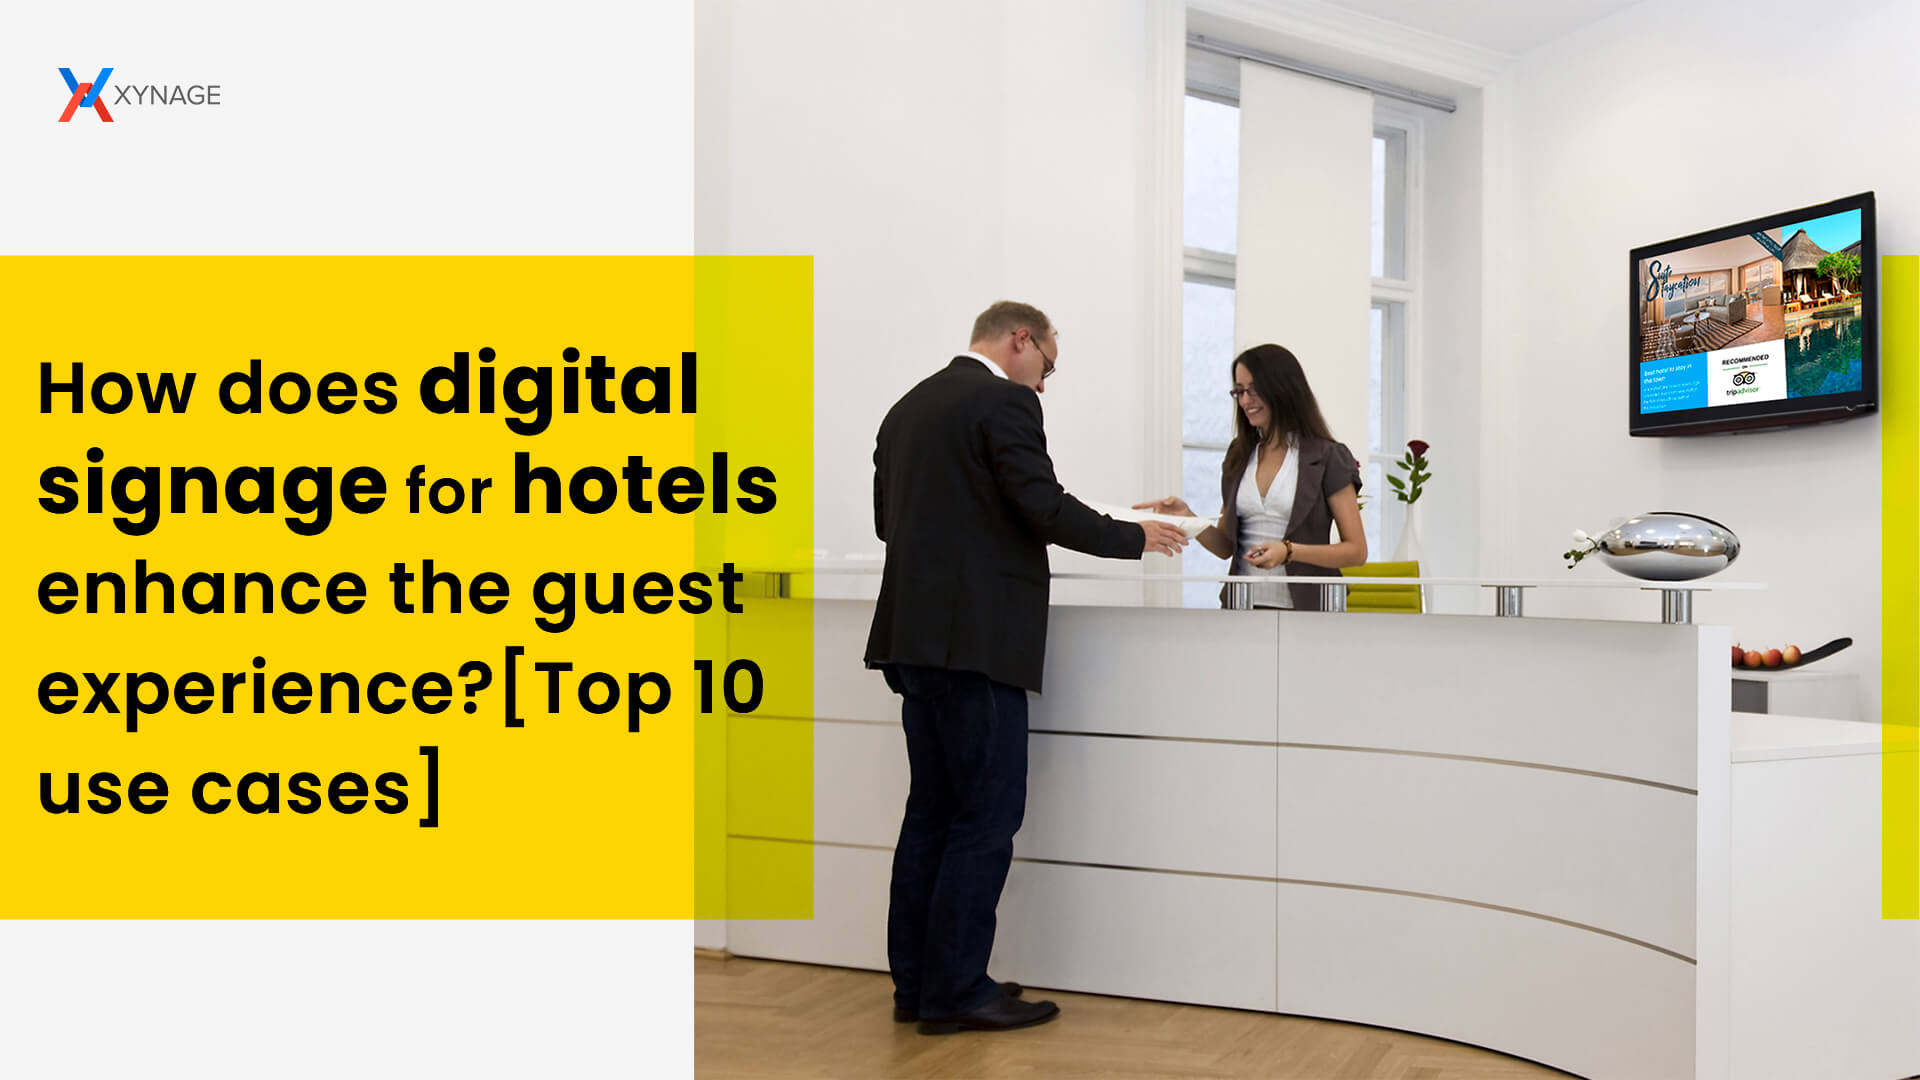 How does digital signage for hotels enhance the guest experience? [Top 10 use cases]